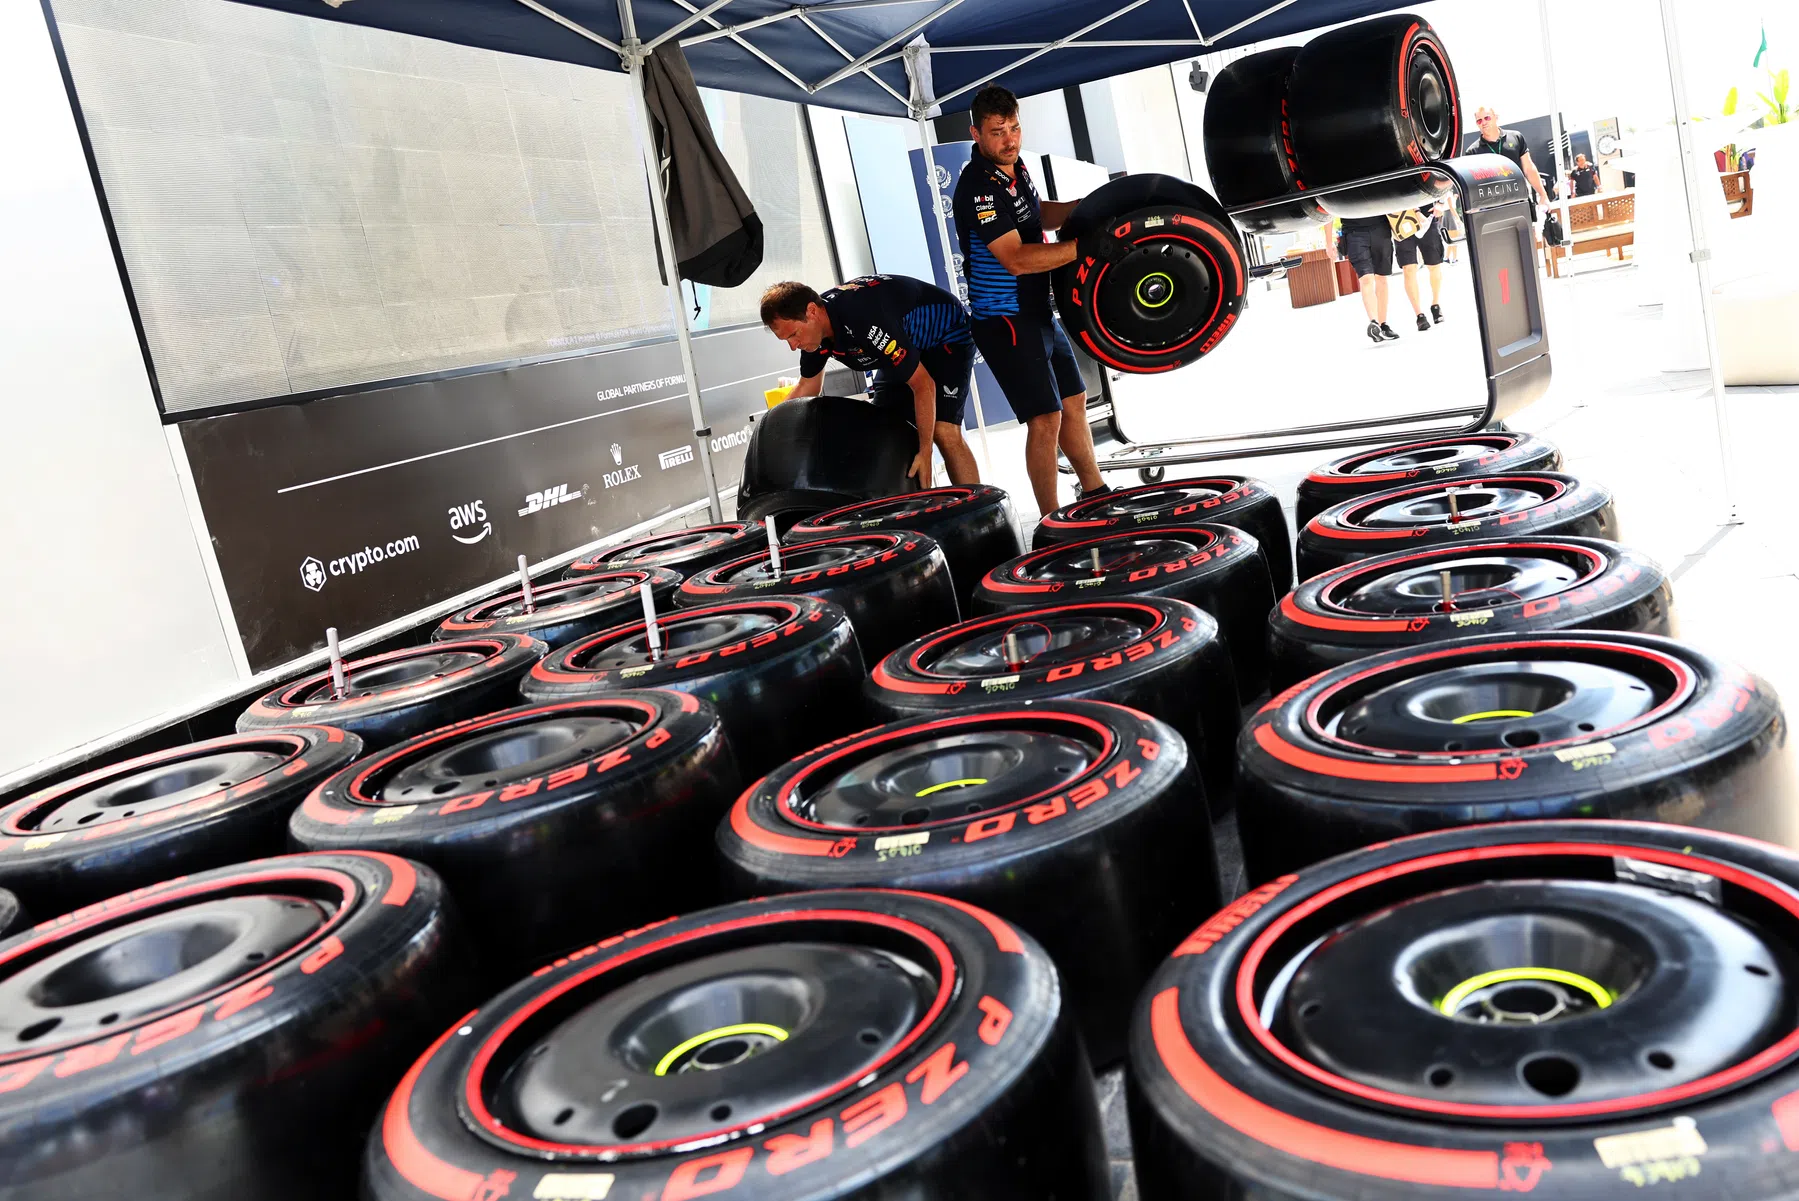 Pirelli tyres change in 2026 this will be different